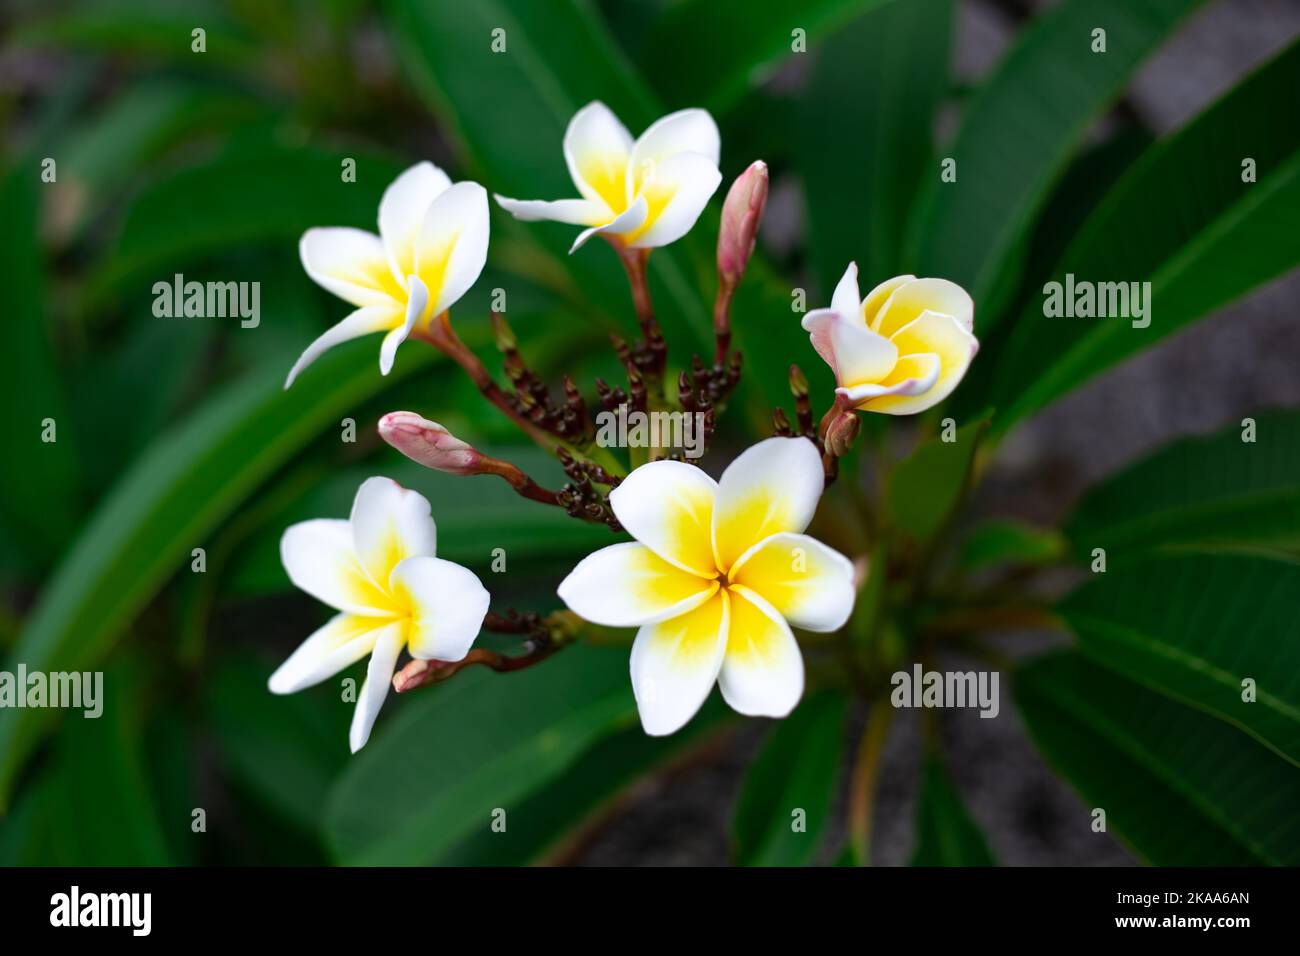 Beautiful white frangipani flowers on a dark background of green foliage. Tropical plants and flowers, selective focus. Stock Photo